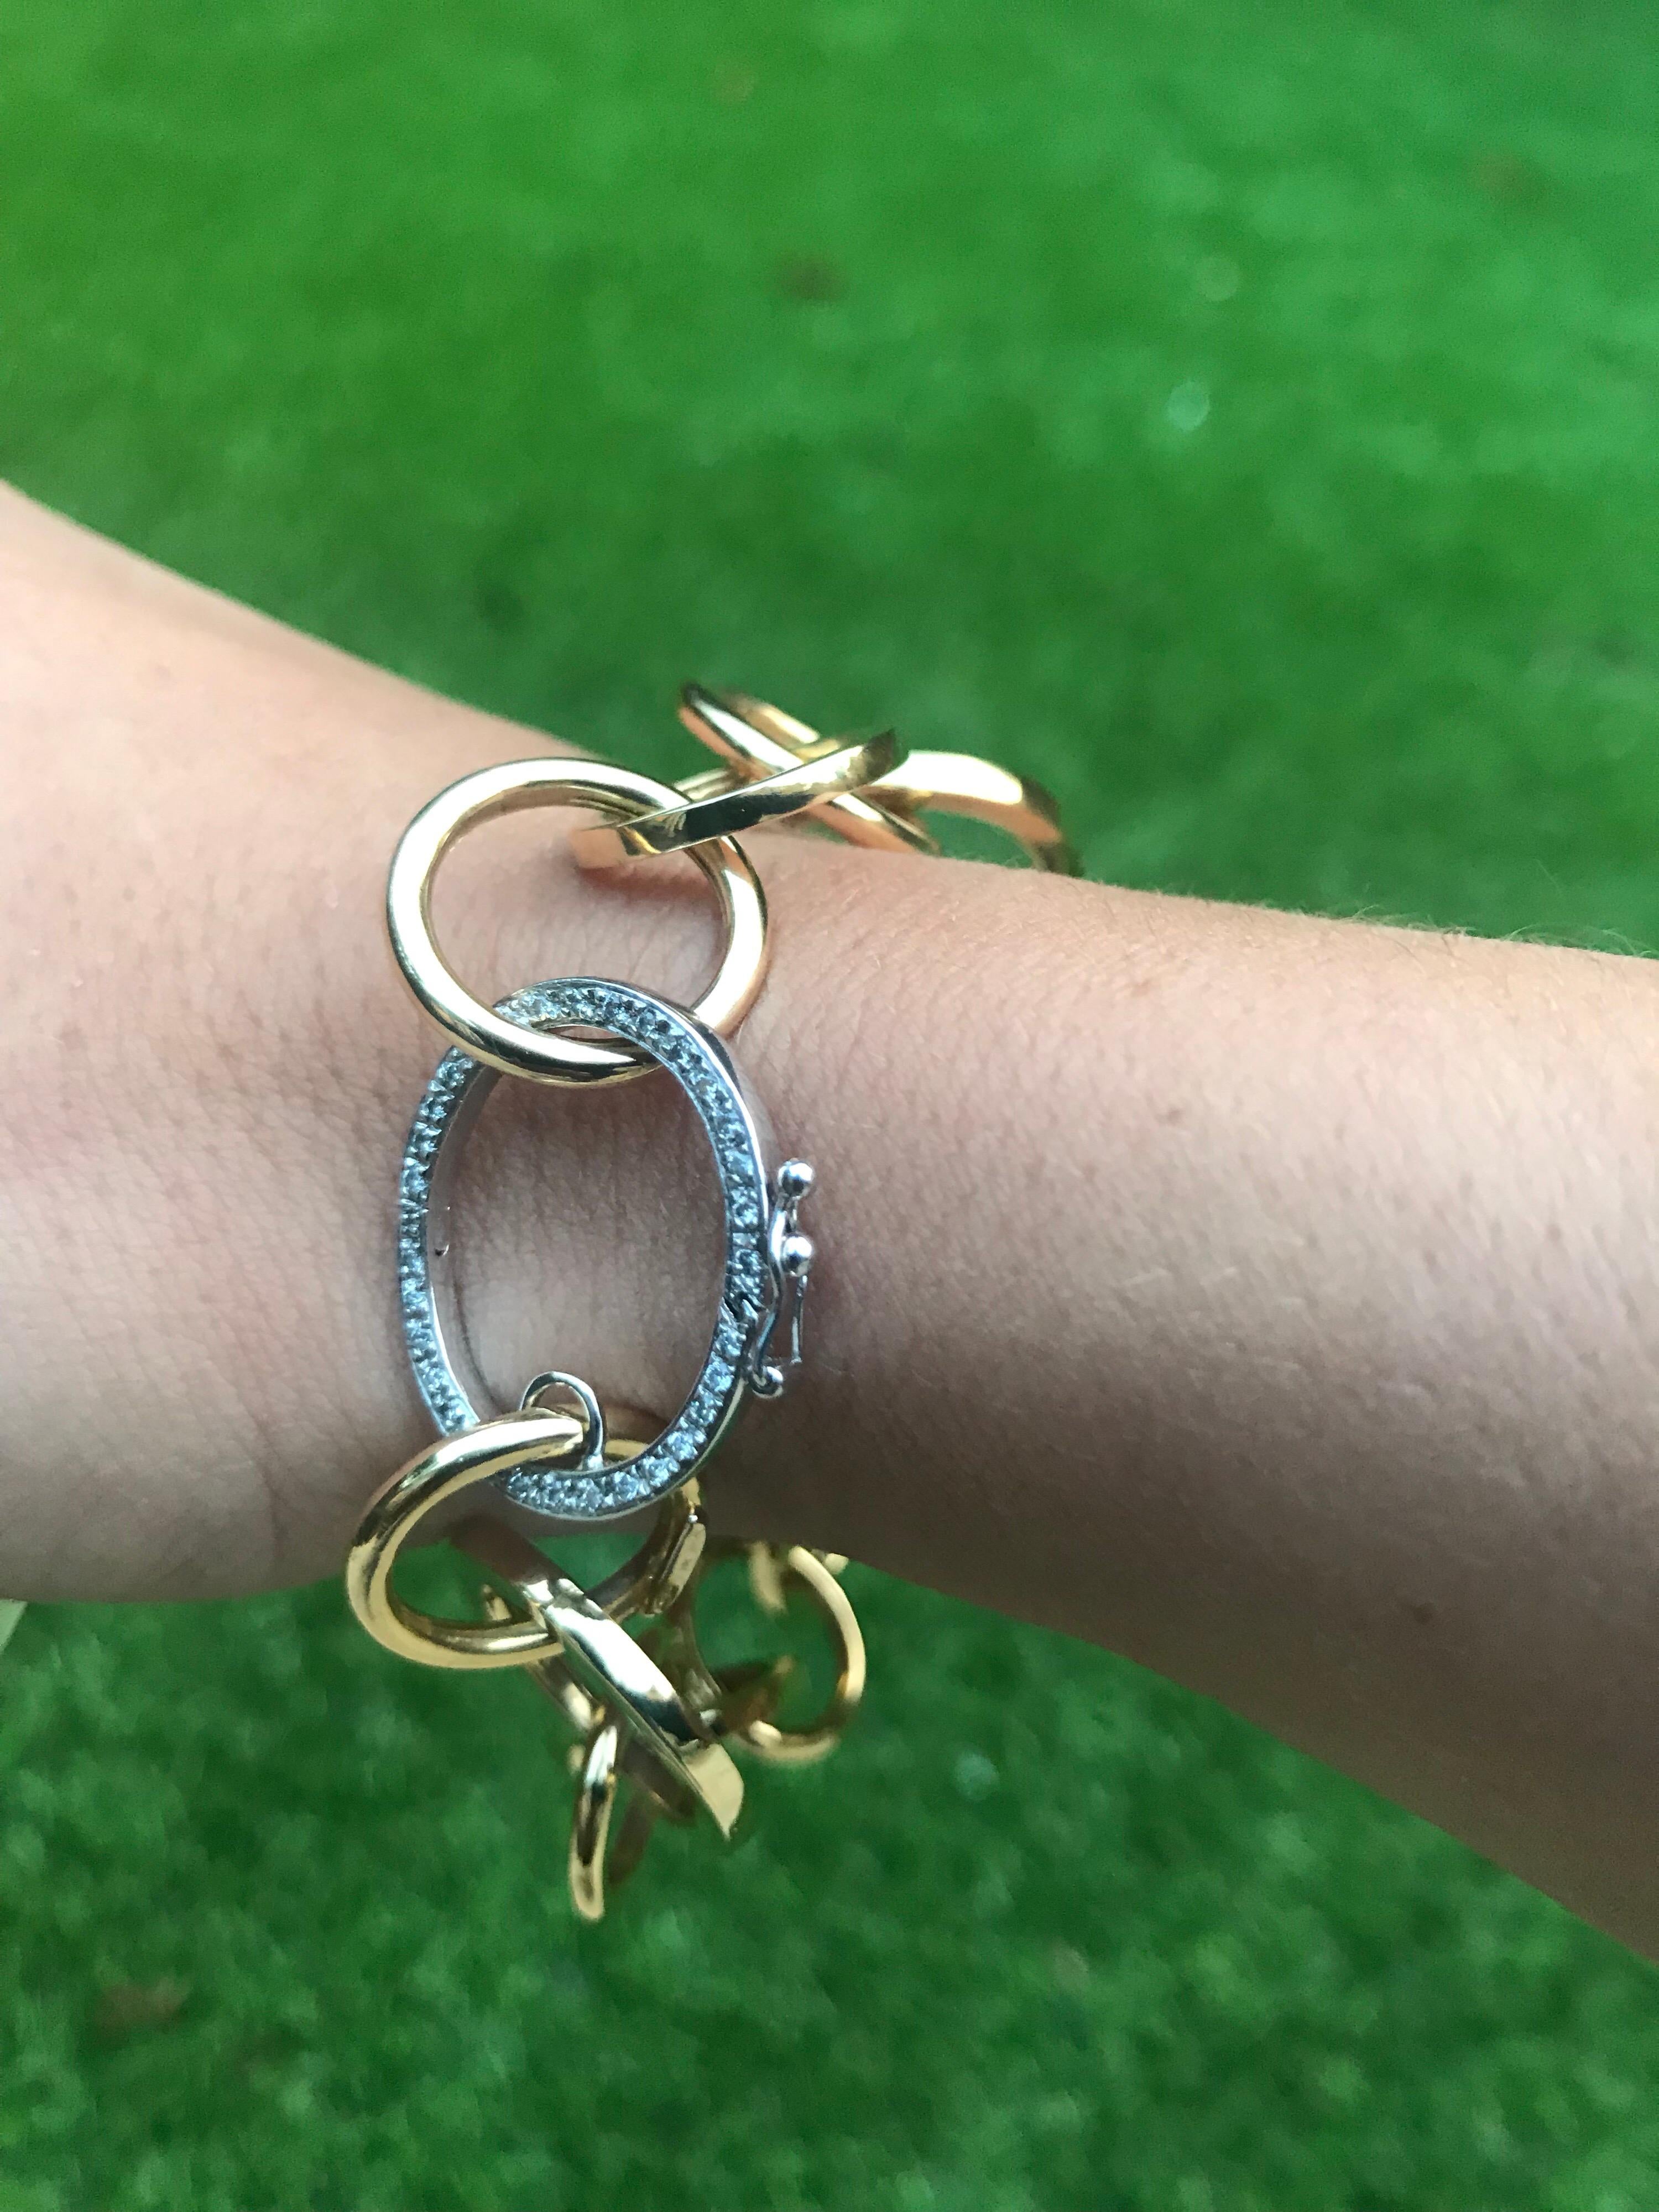 A contemporary take on the classic chain bracelet. This 18kt Yellow Gold bracelet is perfect for everyday wear with the White Diamond set clasp whisking you effortlessly away into cocktail hour. 66 White Brilliant cut Diamonds are set in the 18kt